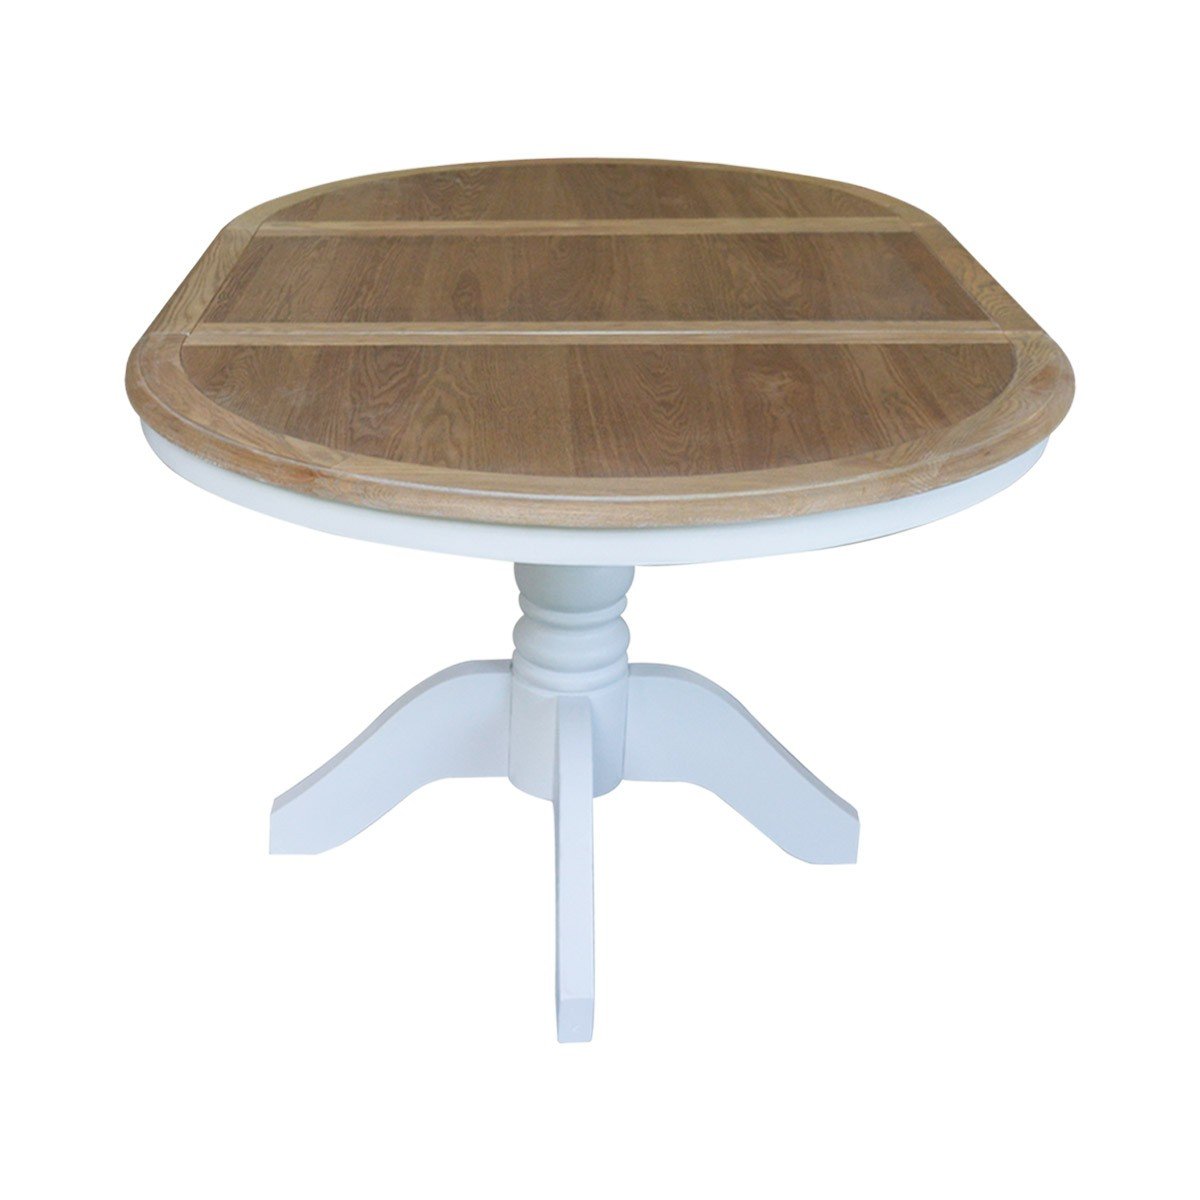 White Extendable Round Dining Table, White Round Extendable Dining Table Australia